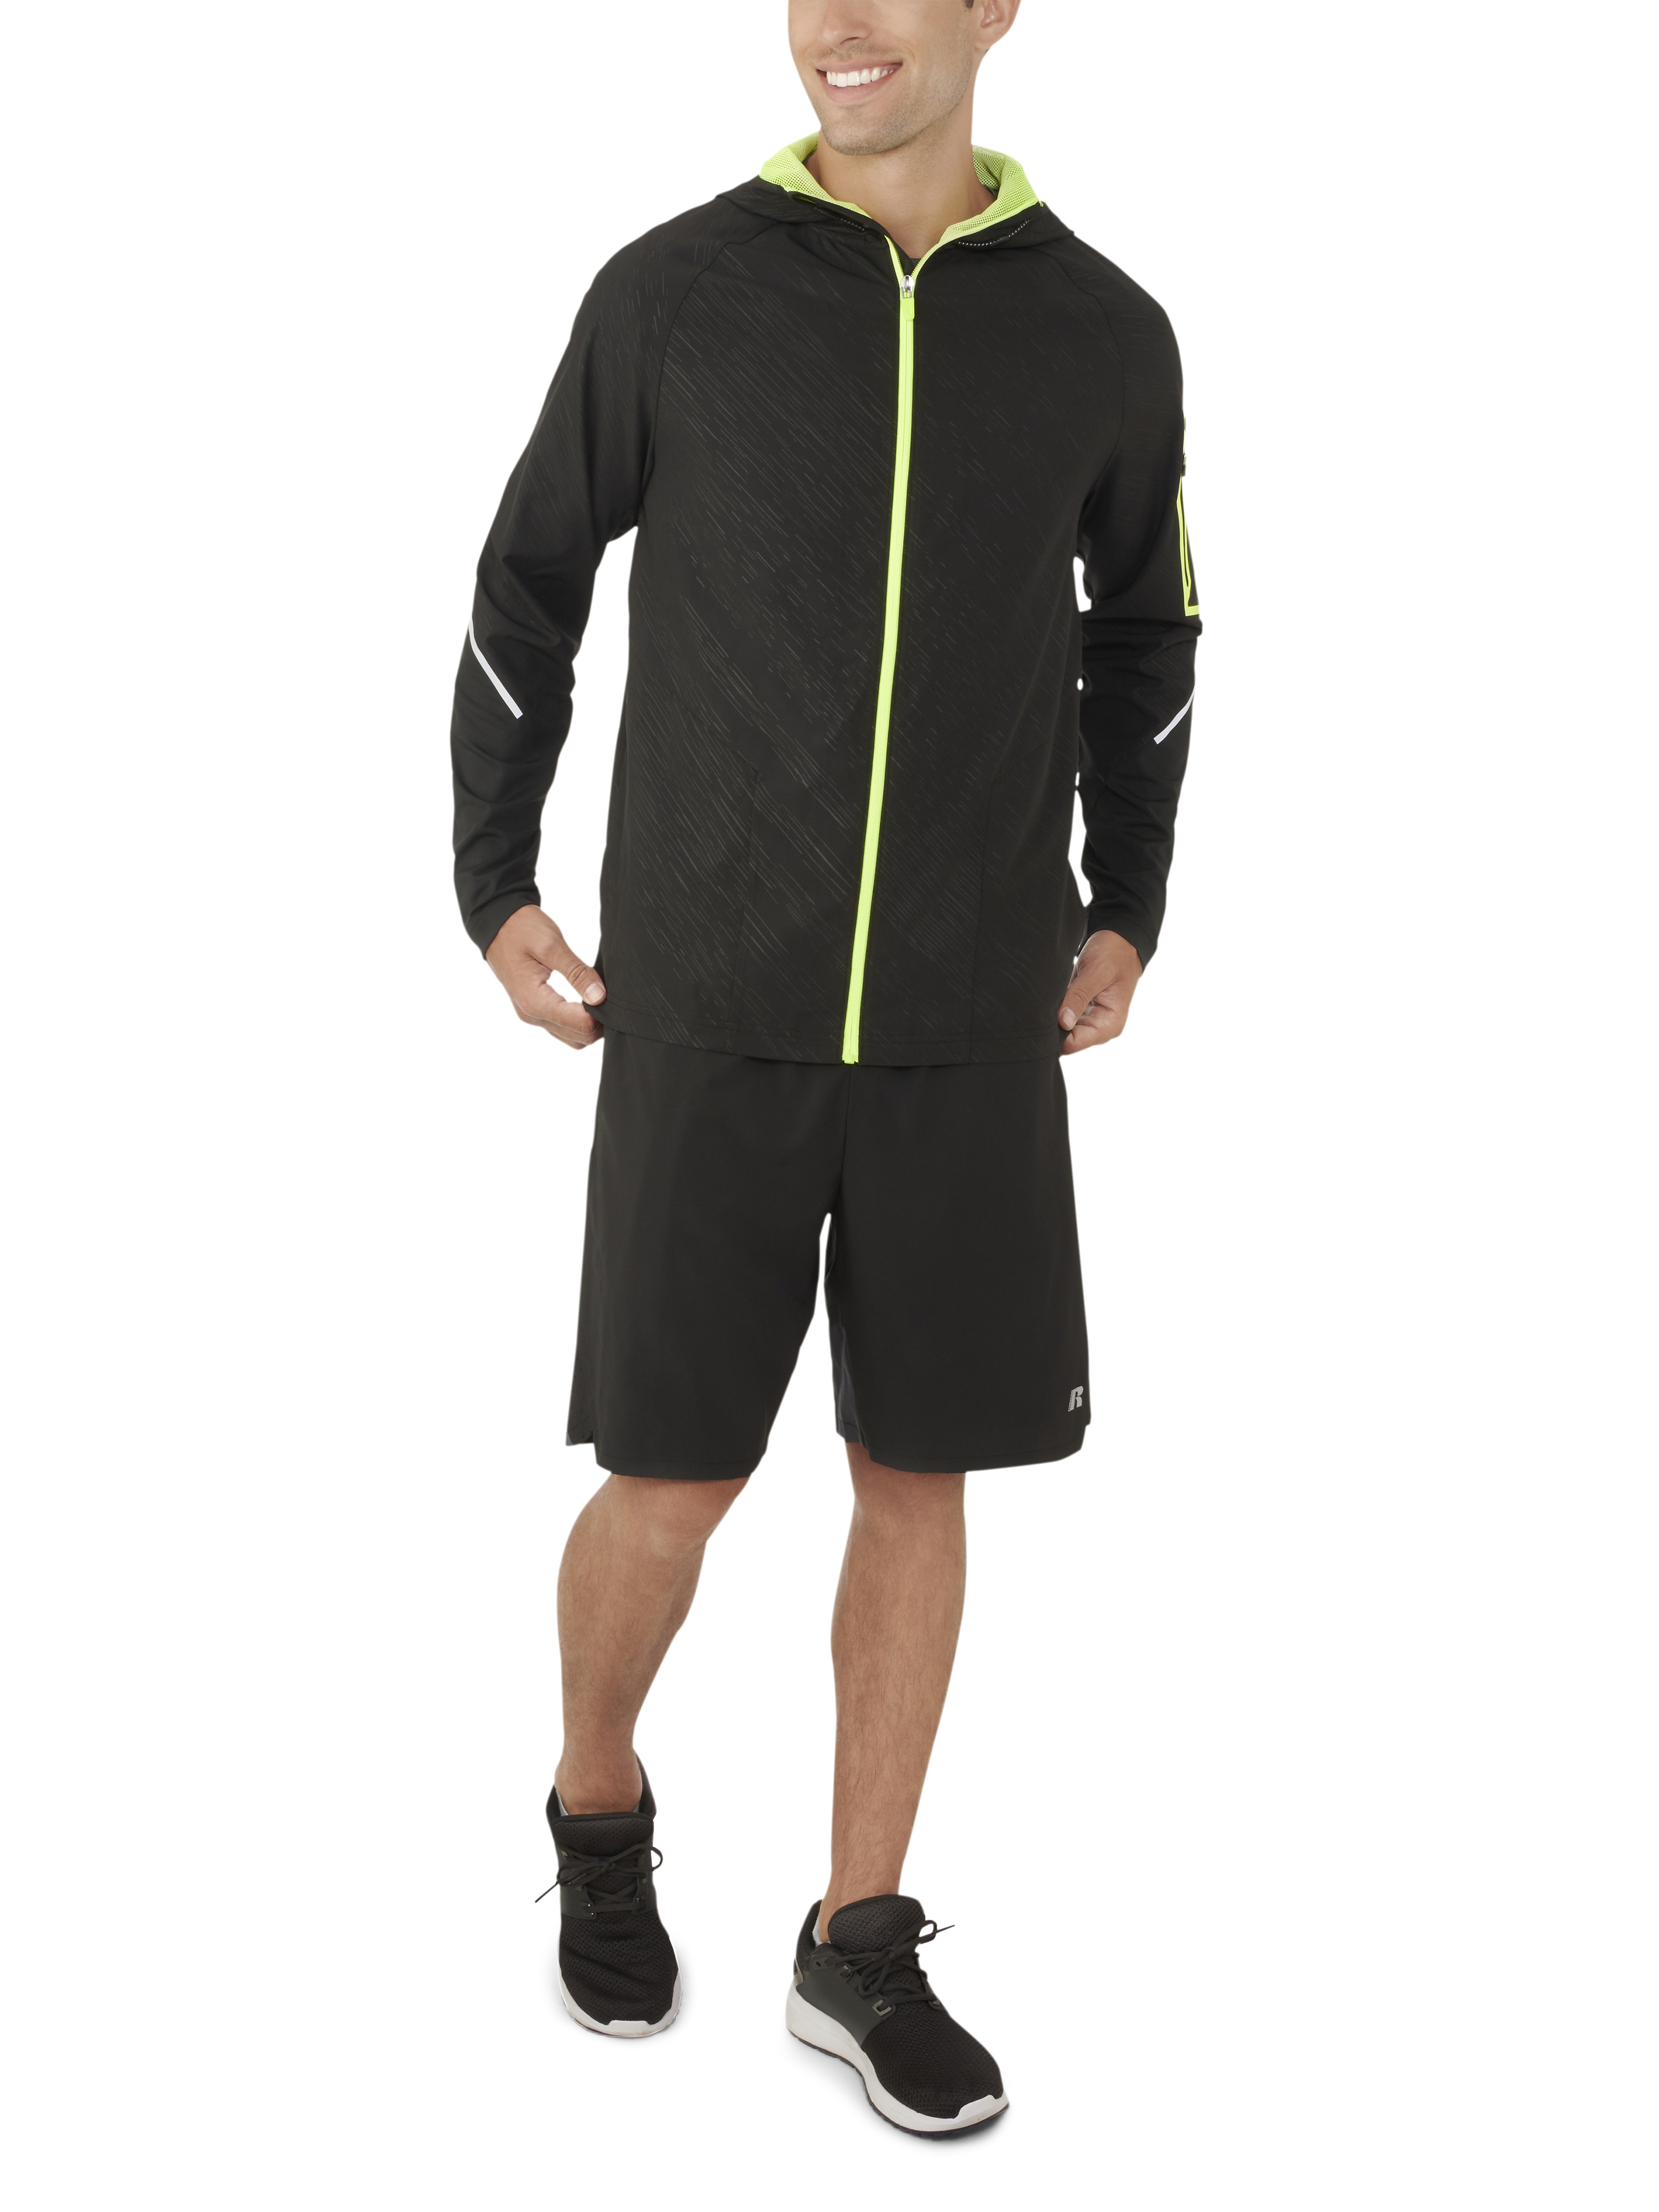 Russell Exclusive Men's Core Performance Jacket - image 5 of 7